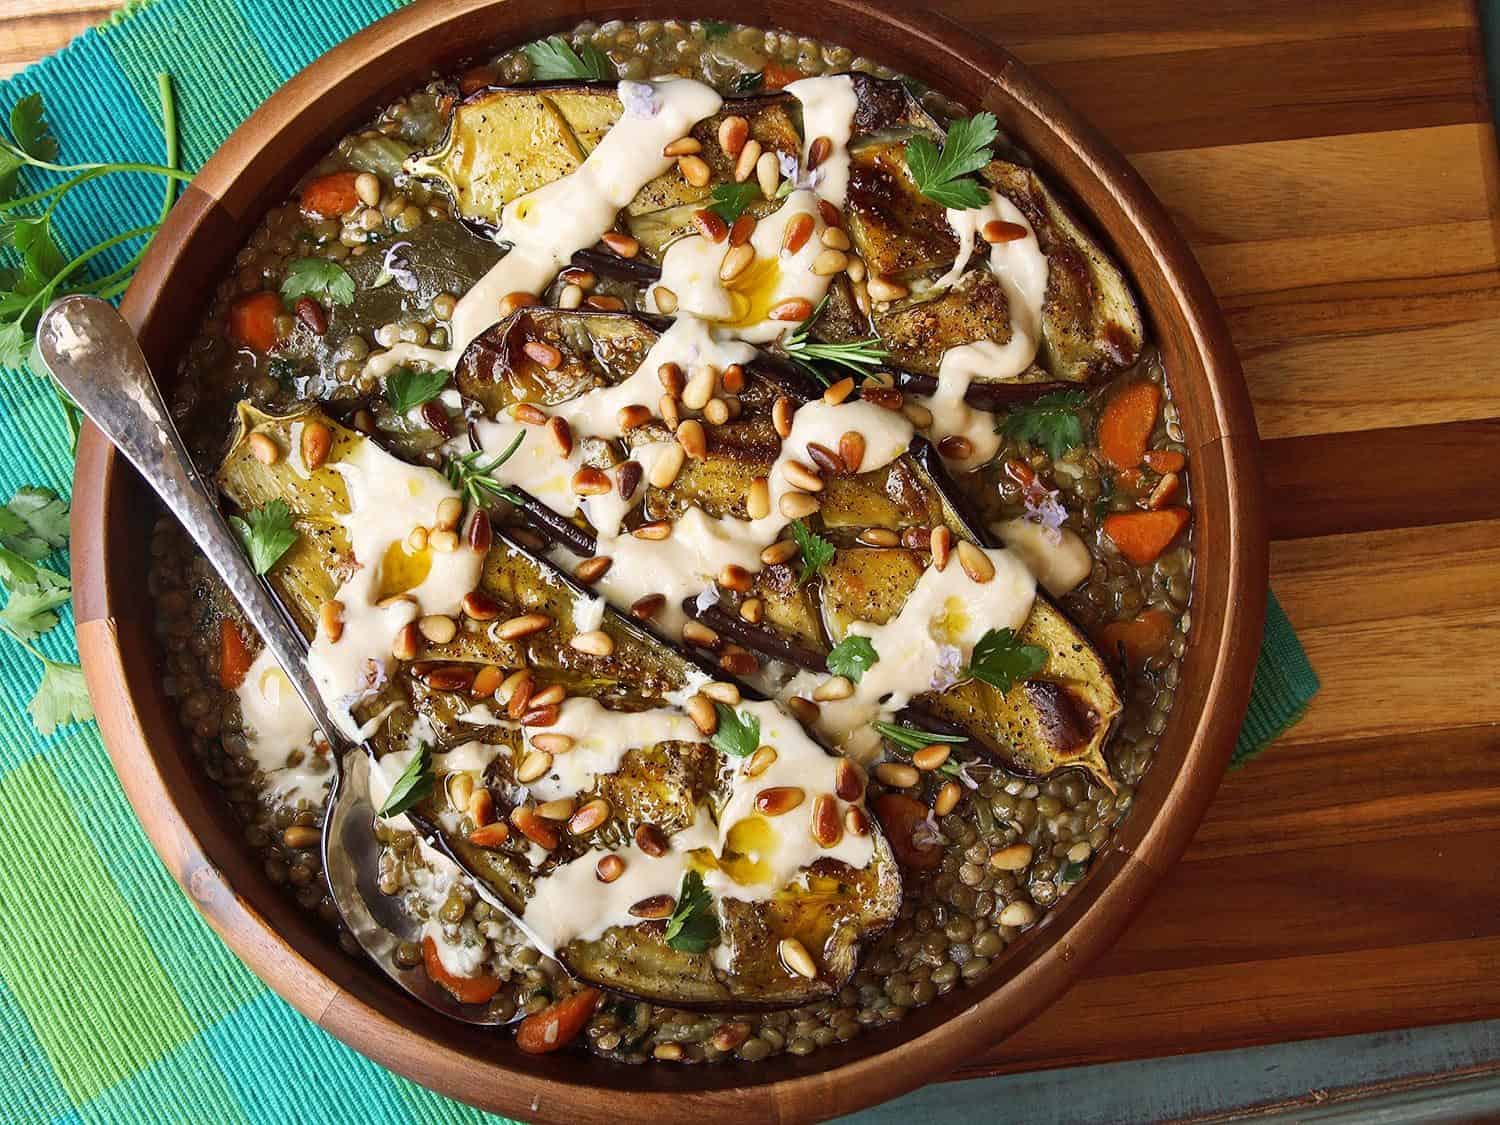 roasted eggplants with tahini, pine nuts, and lentils